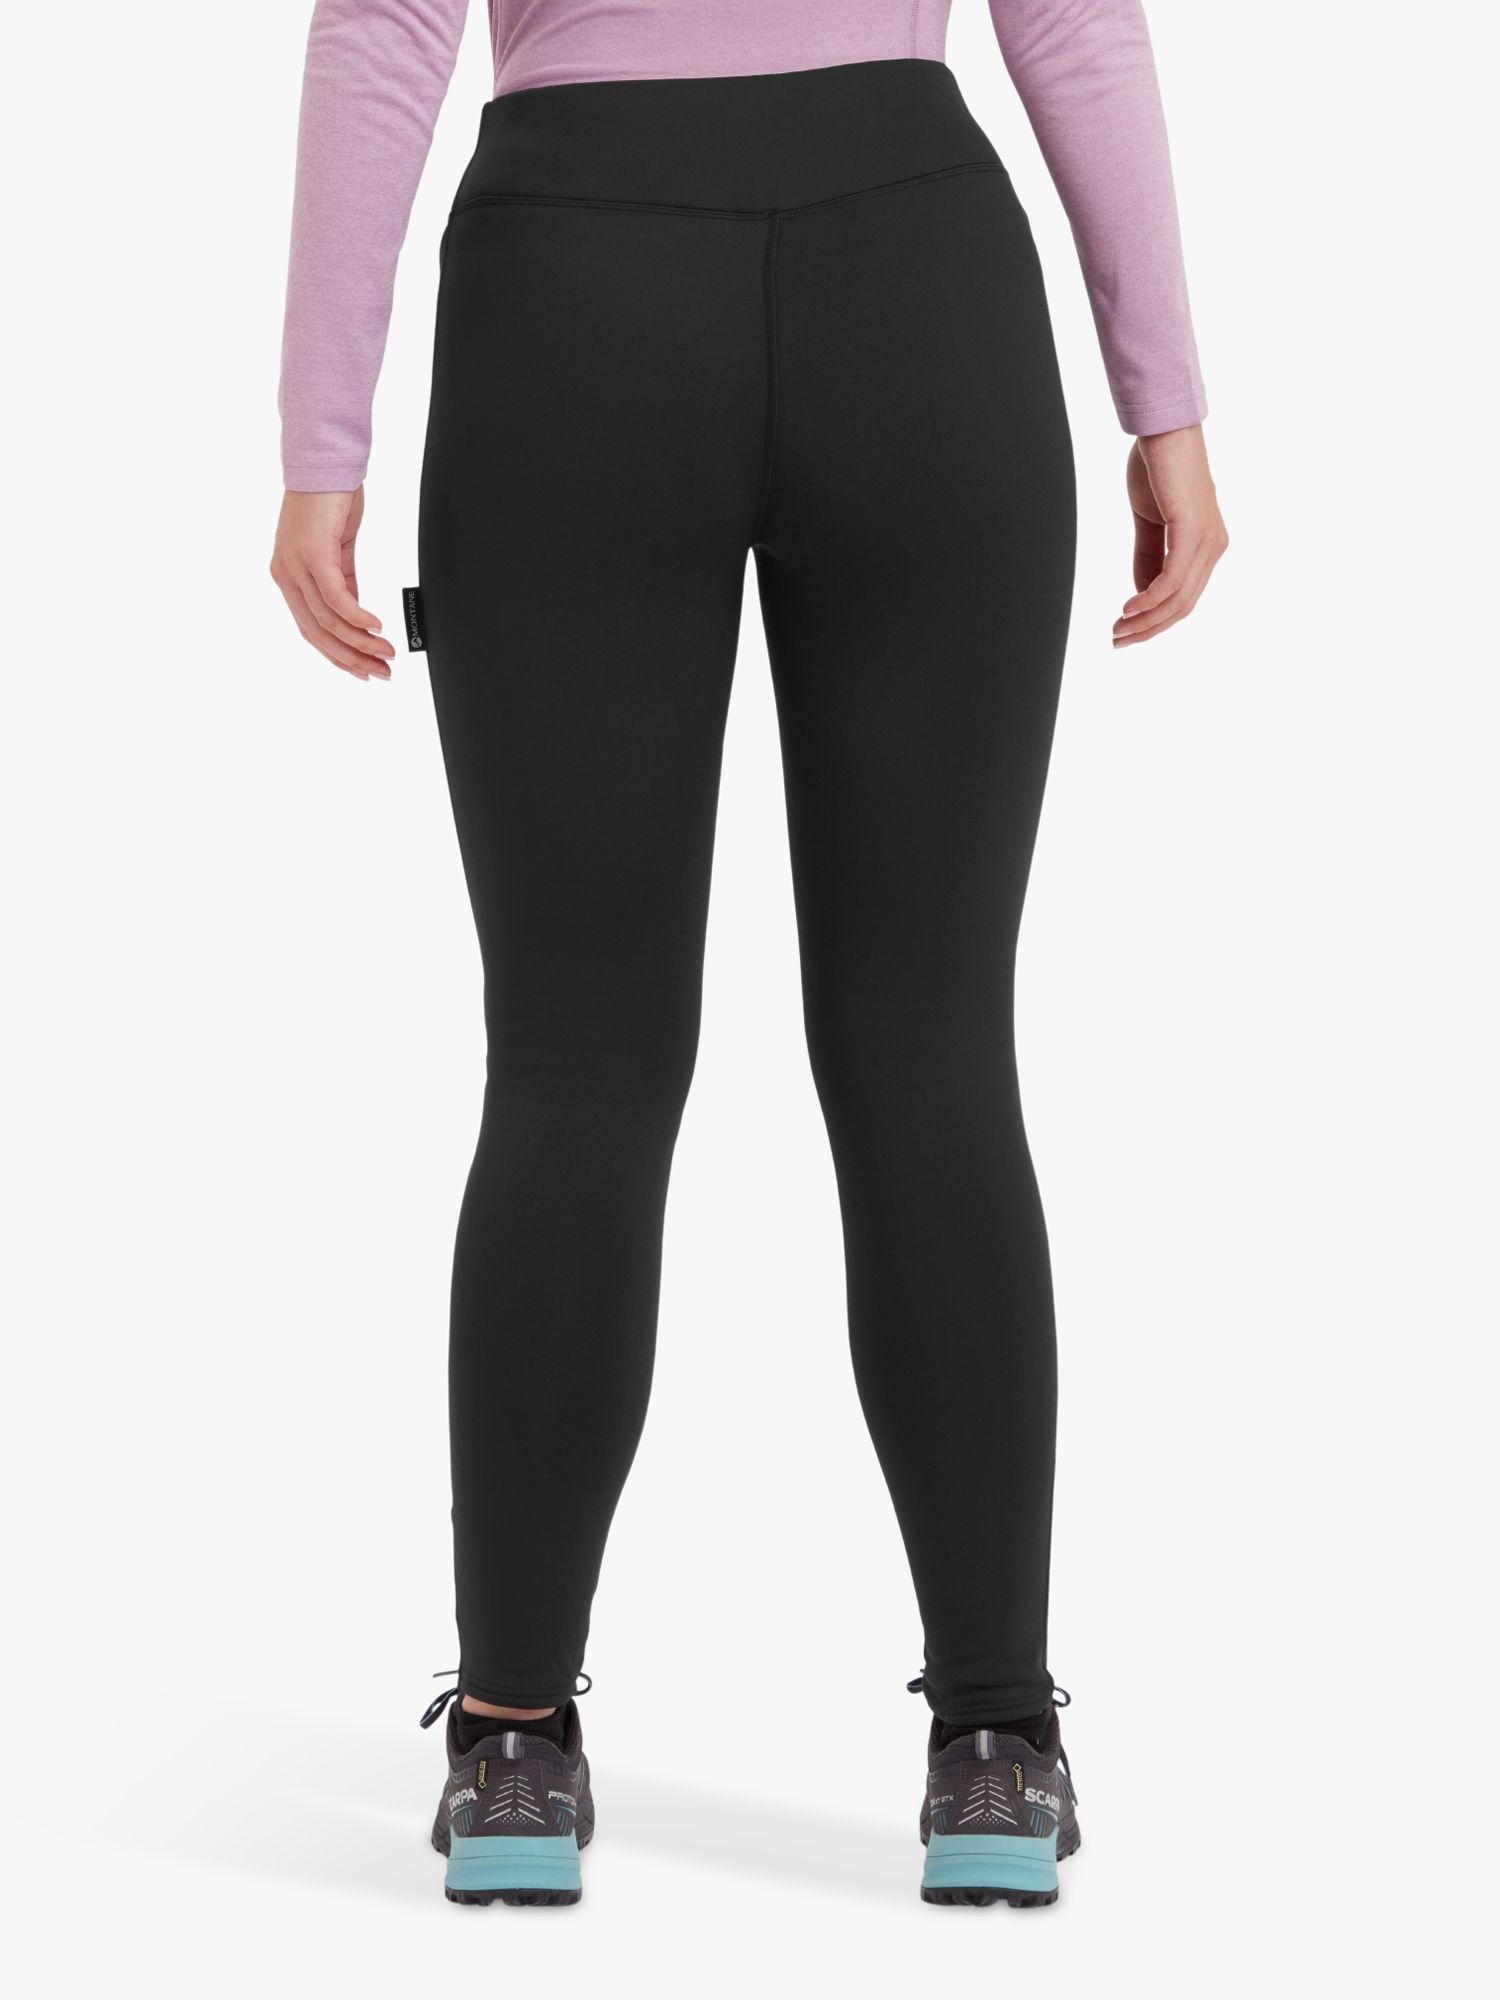 Montane Fury Stretch Fleece Trousers at John Lewis & Partners